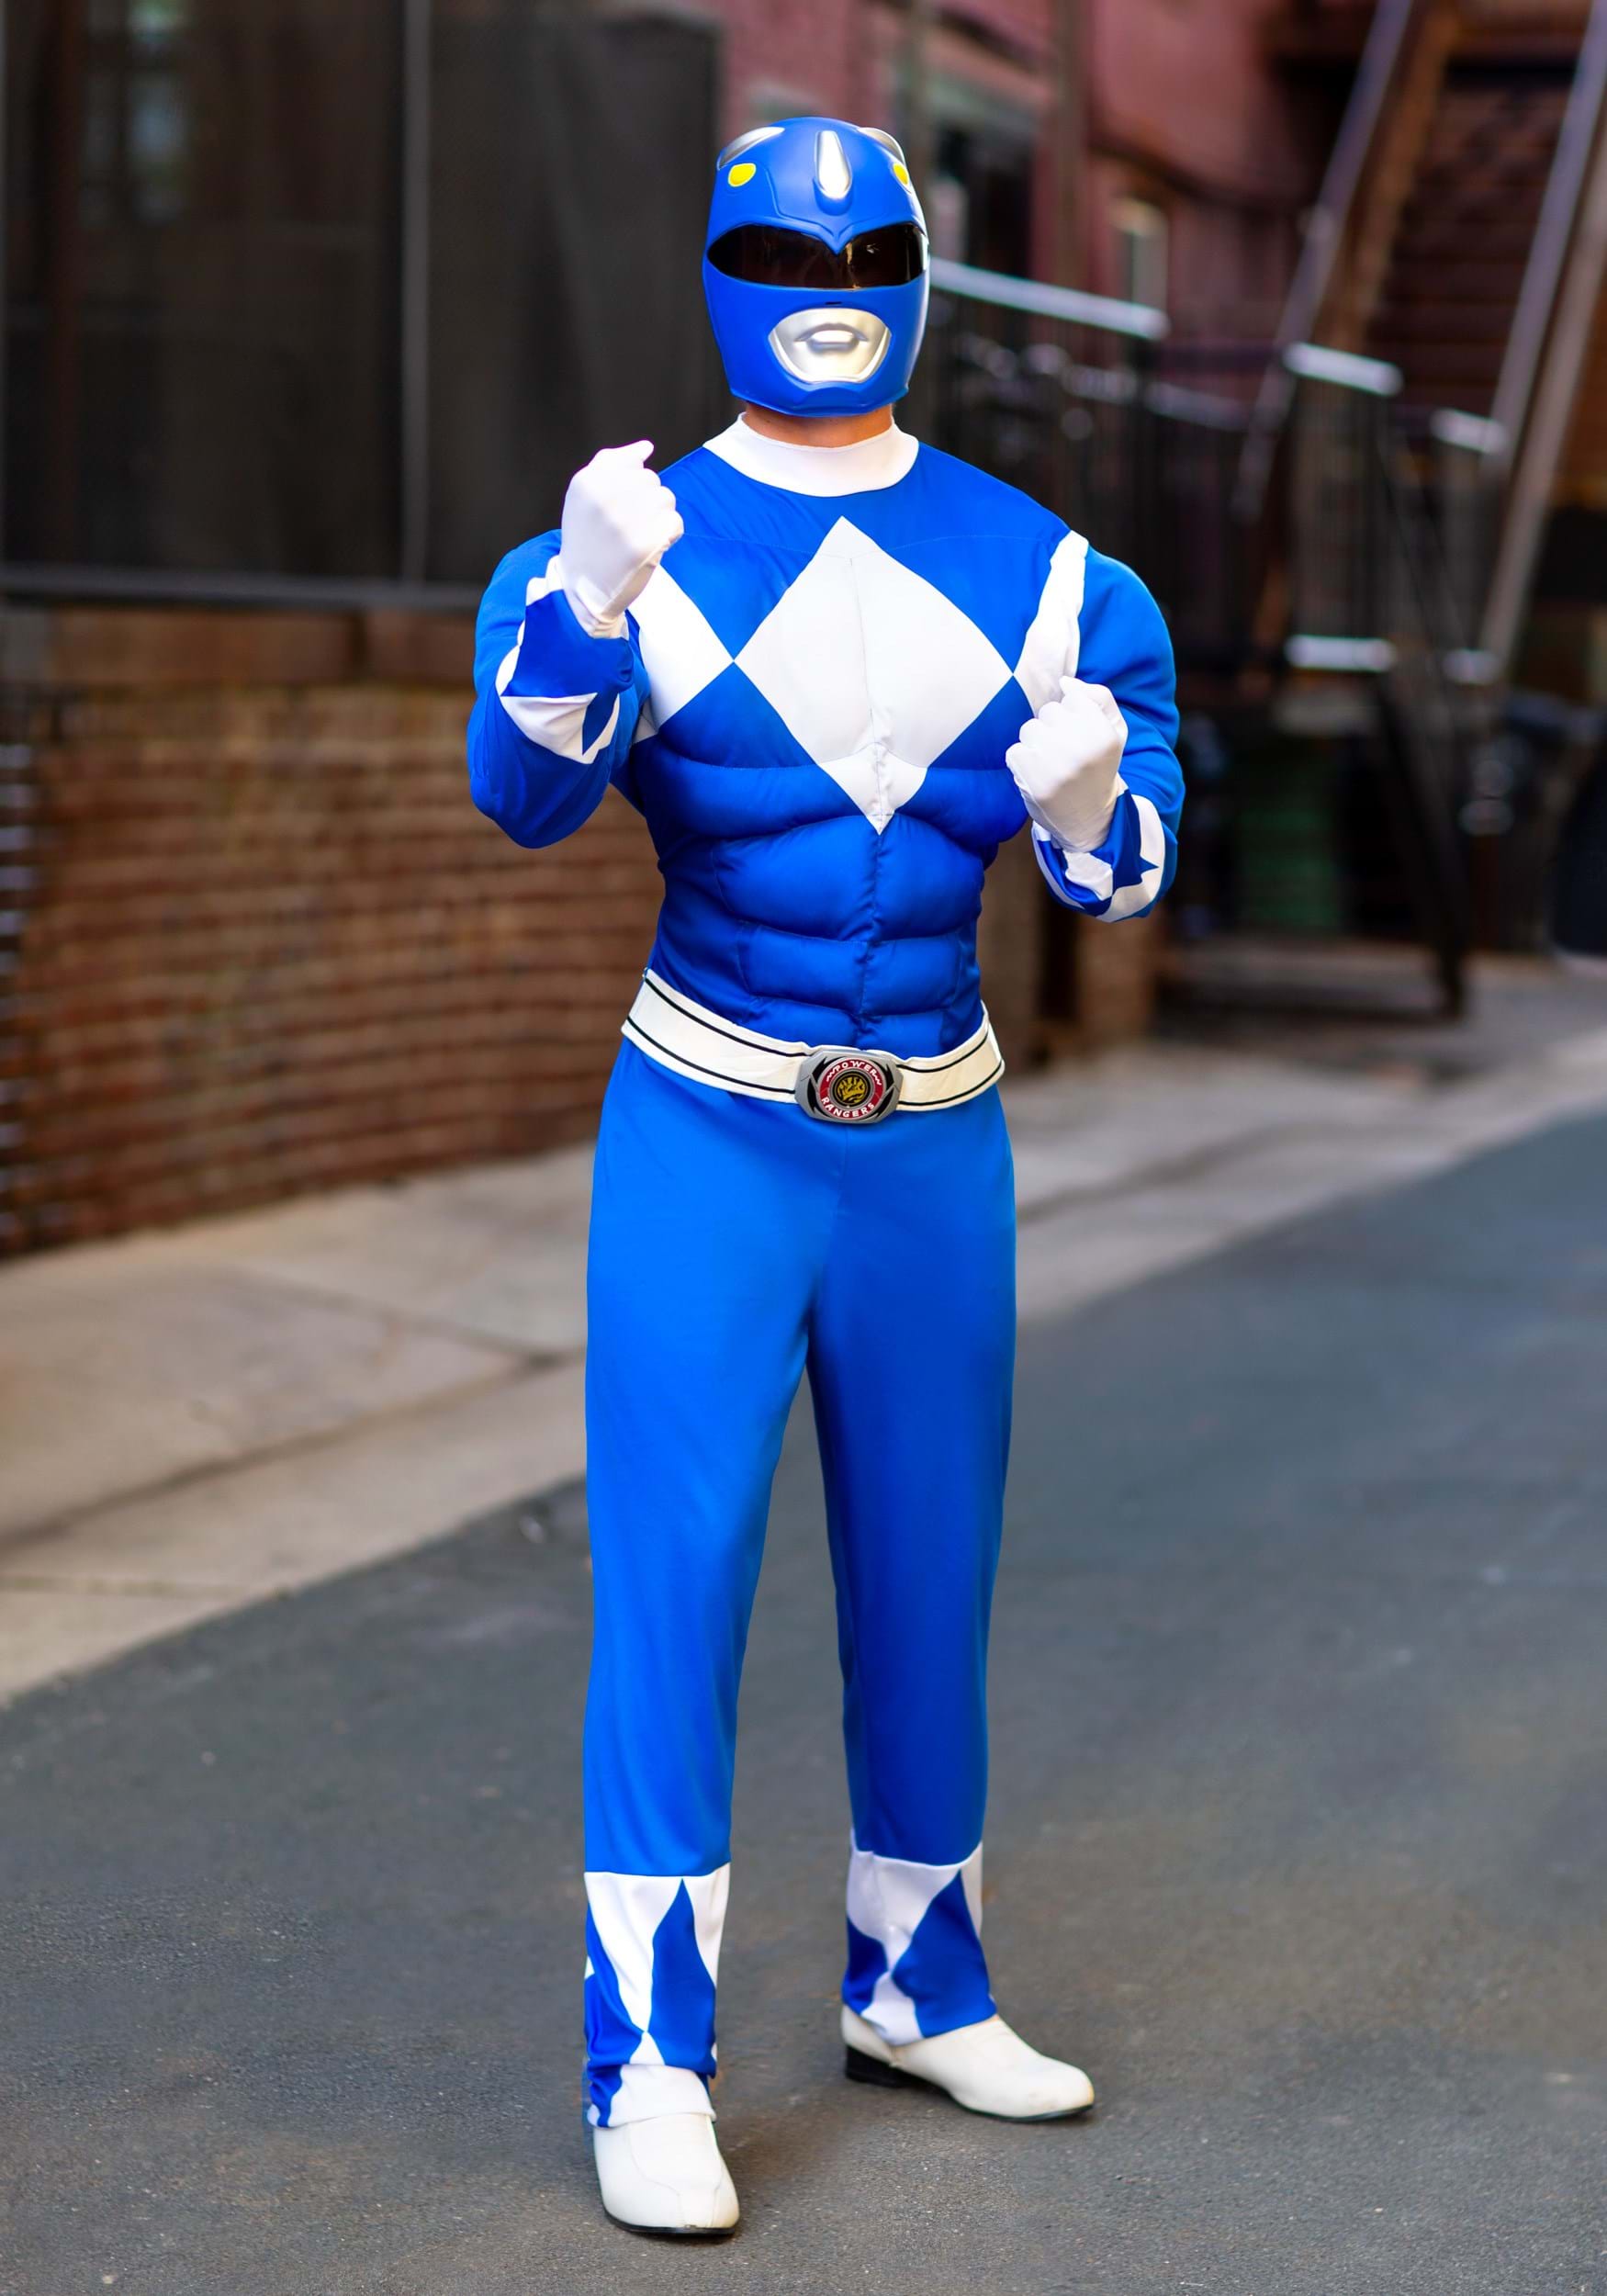 https://images.halloweencostumes.com/products/45967/1-1/mens-power-rangers-blue-ranger-muscle-costume-update.jpg